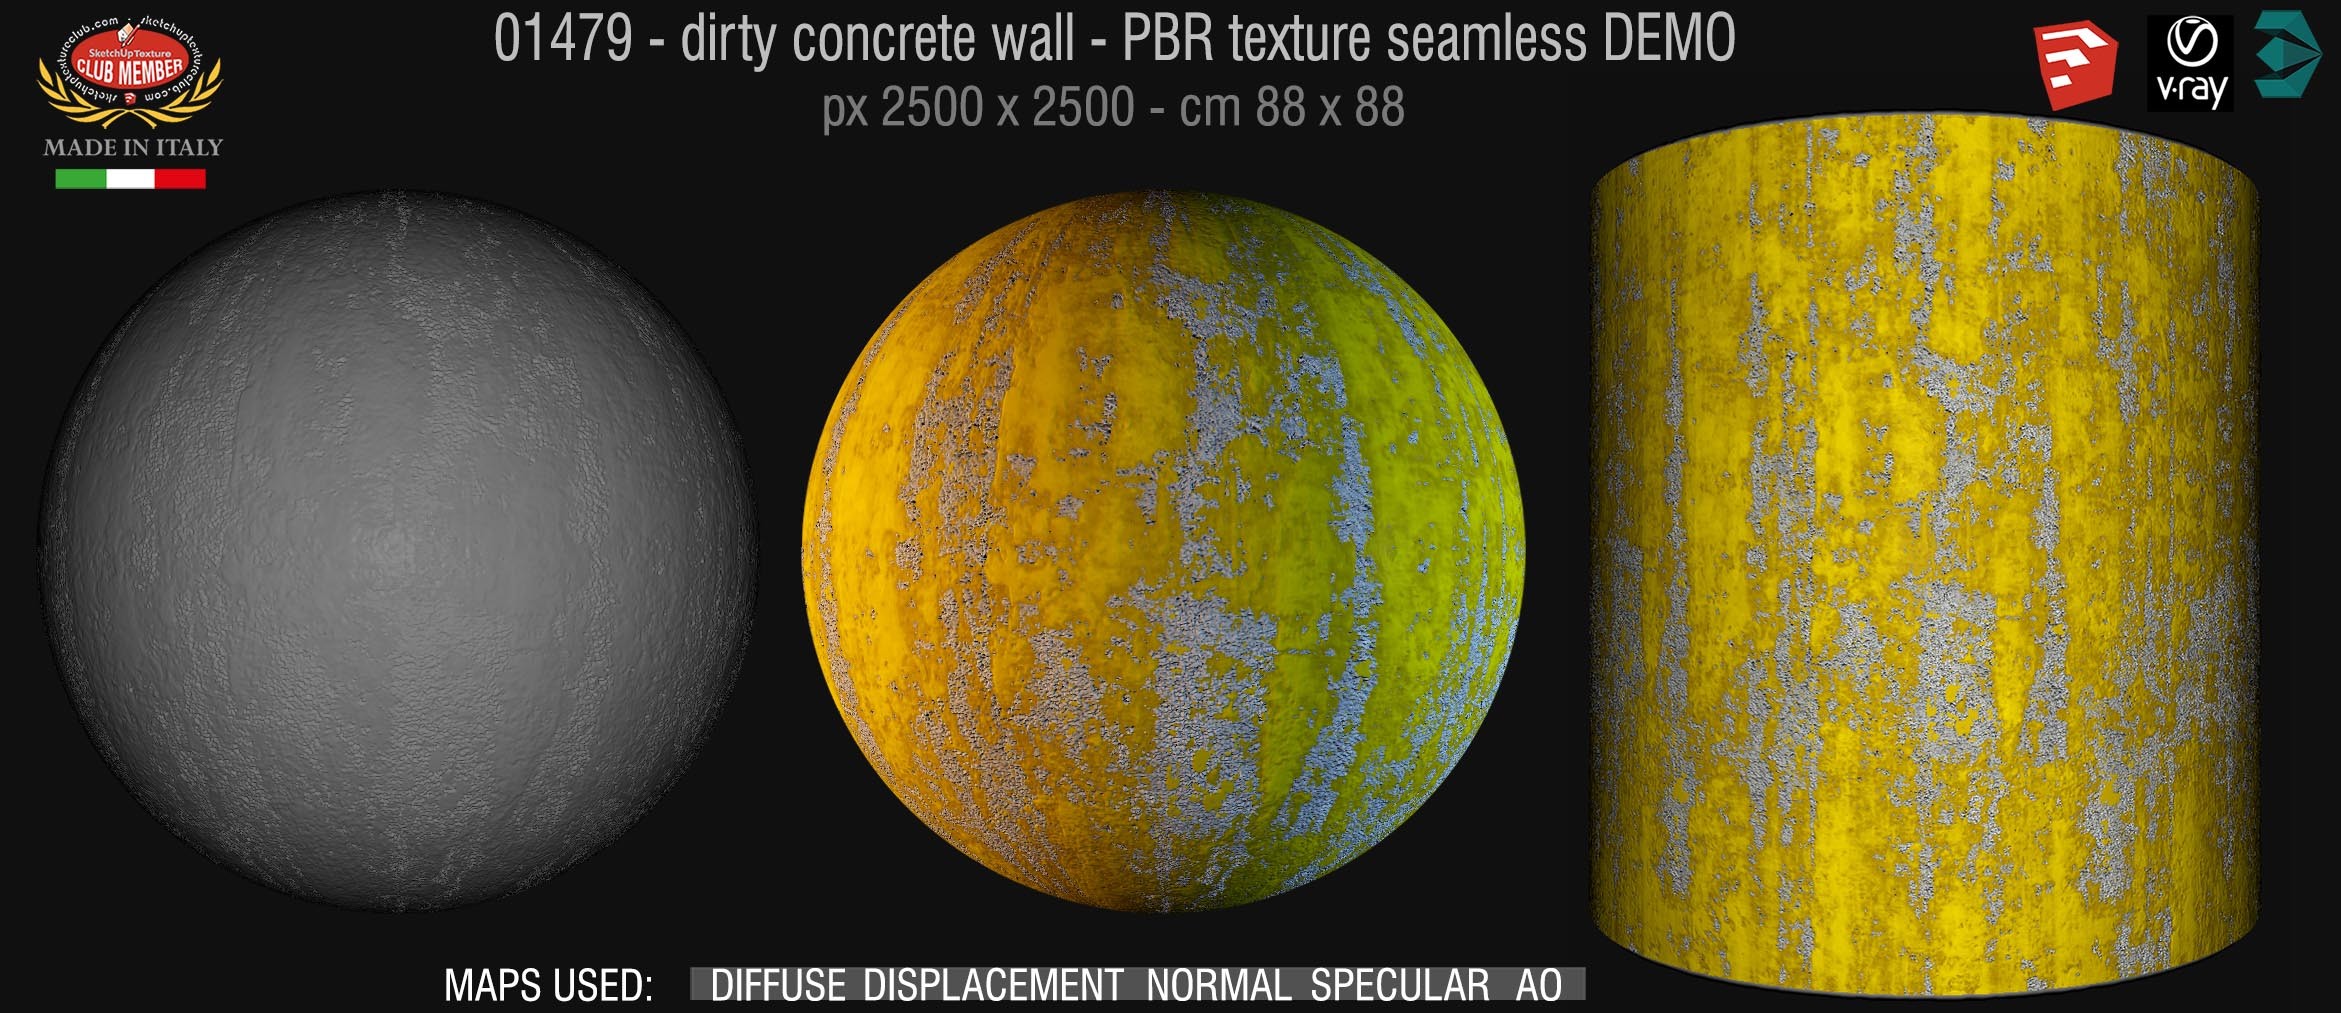 01479 Concrete bare dirty wall PBR texture seamless DEMO